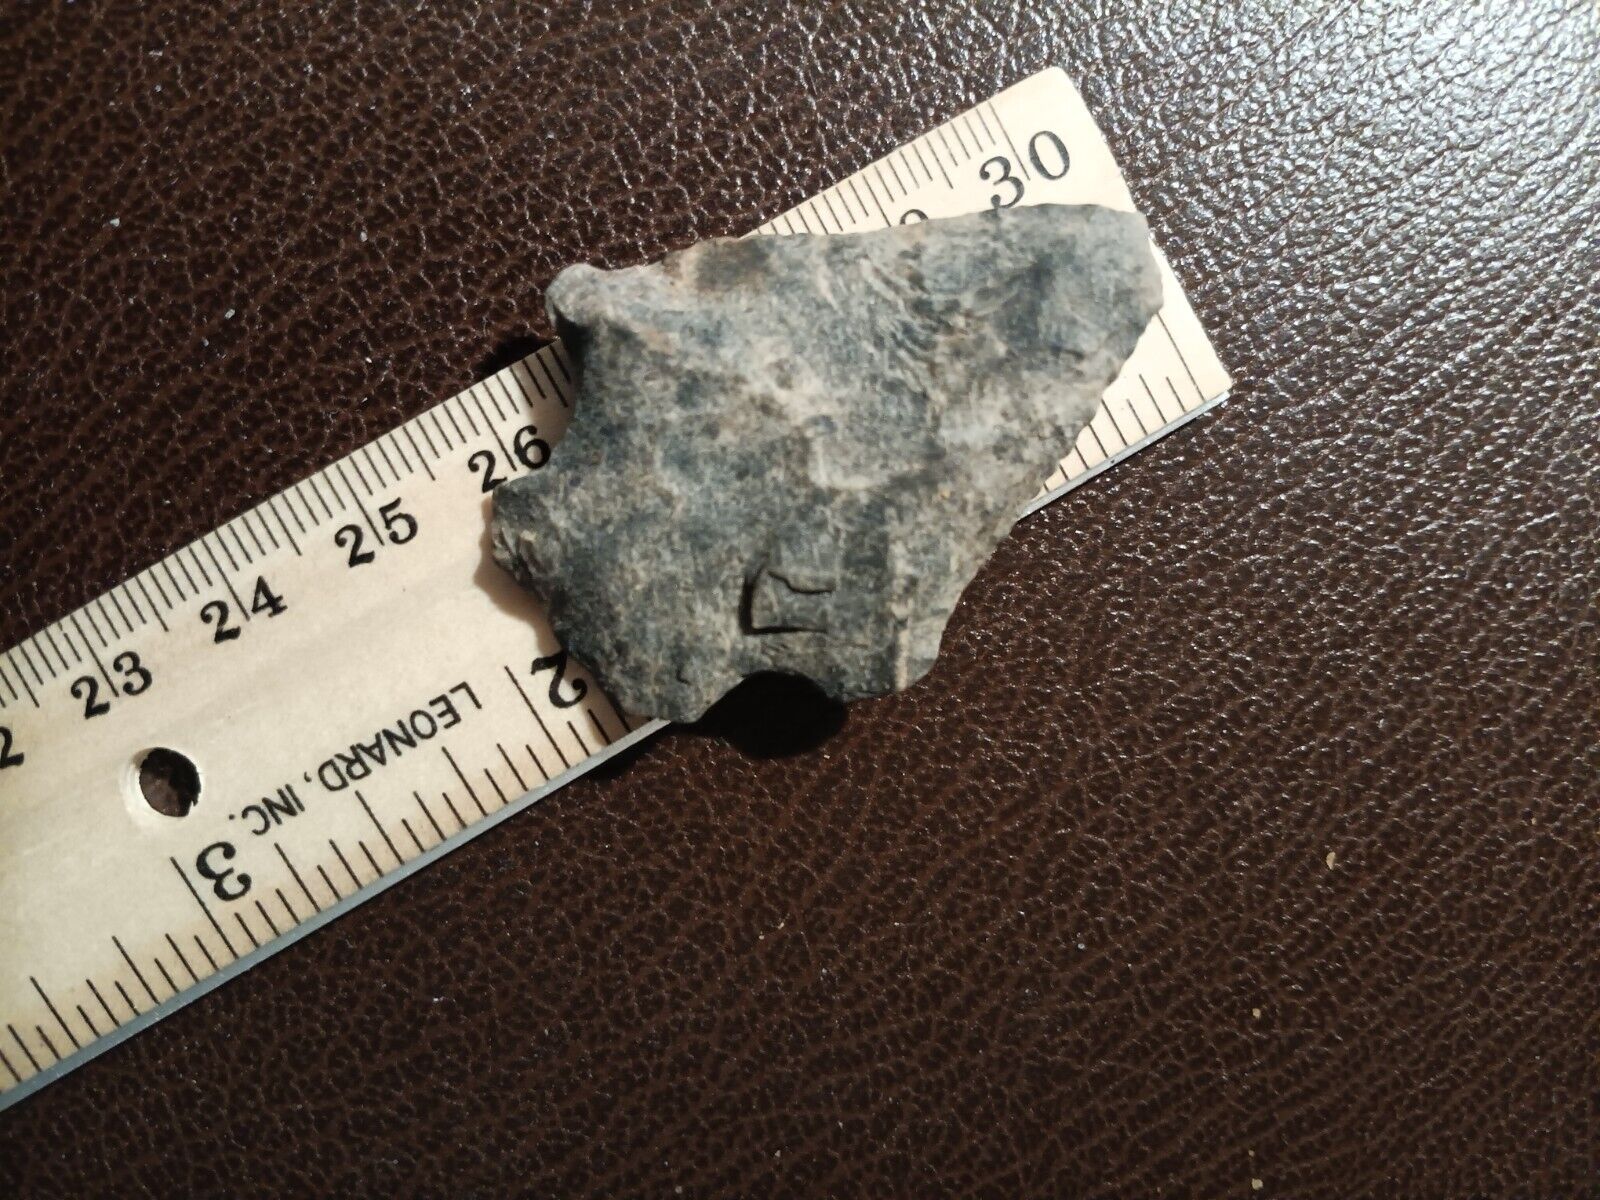 AUTHENTIC NATIVE AMERICAN INDIAN ARTIFACT FOUND, EASTERN N.C.--- DDD/30